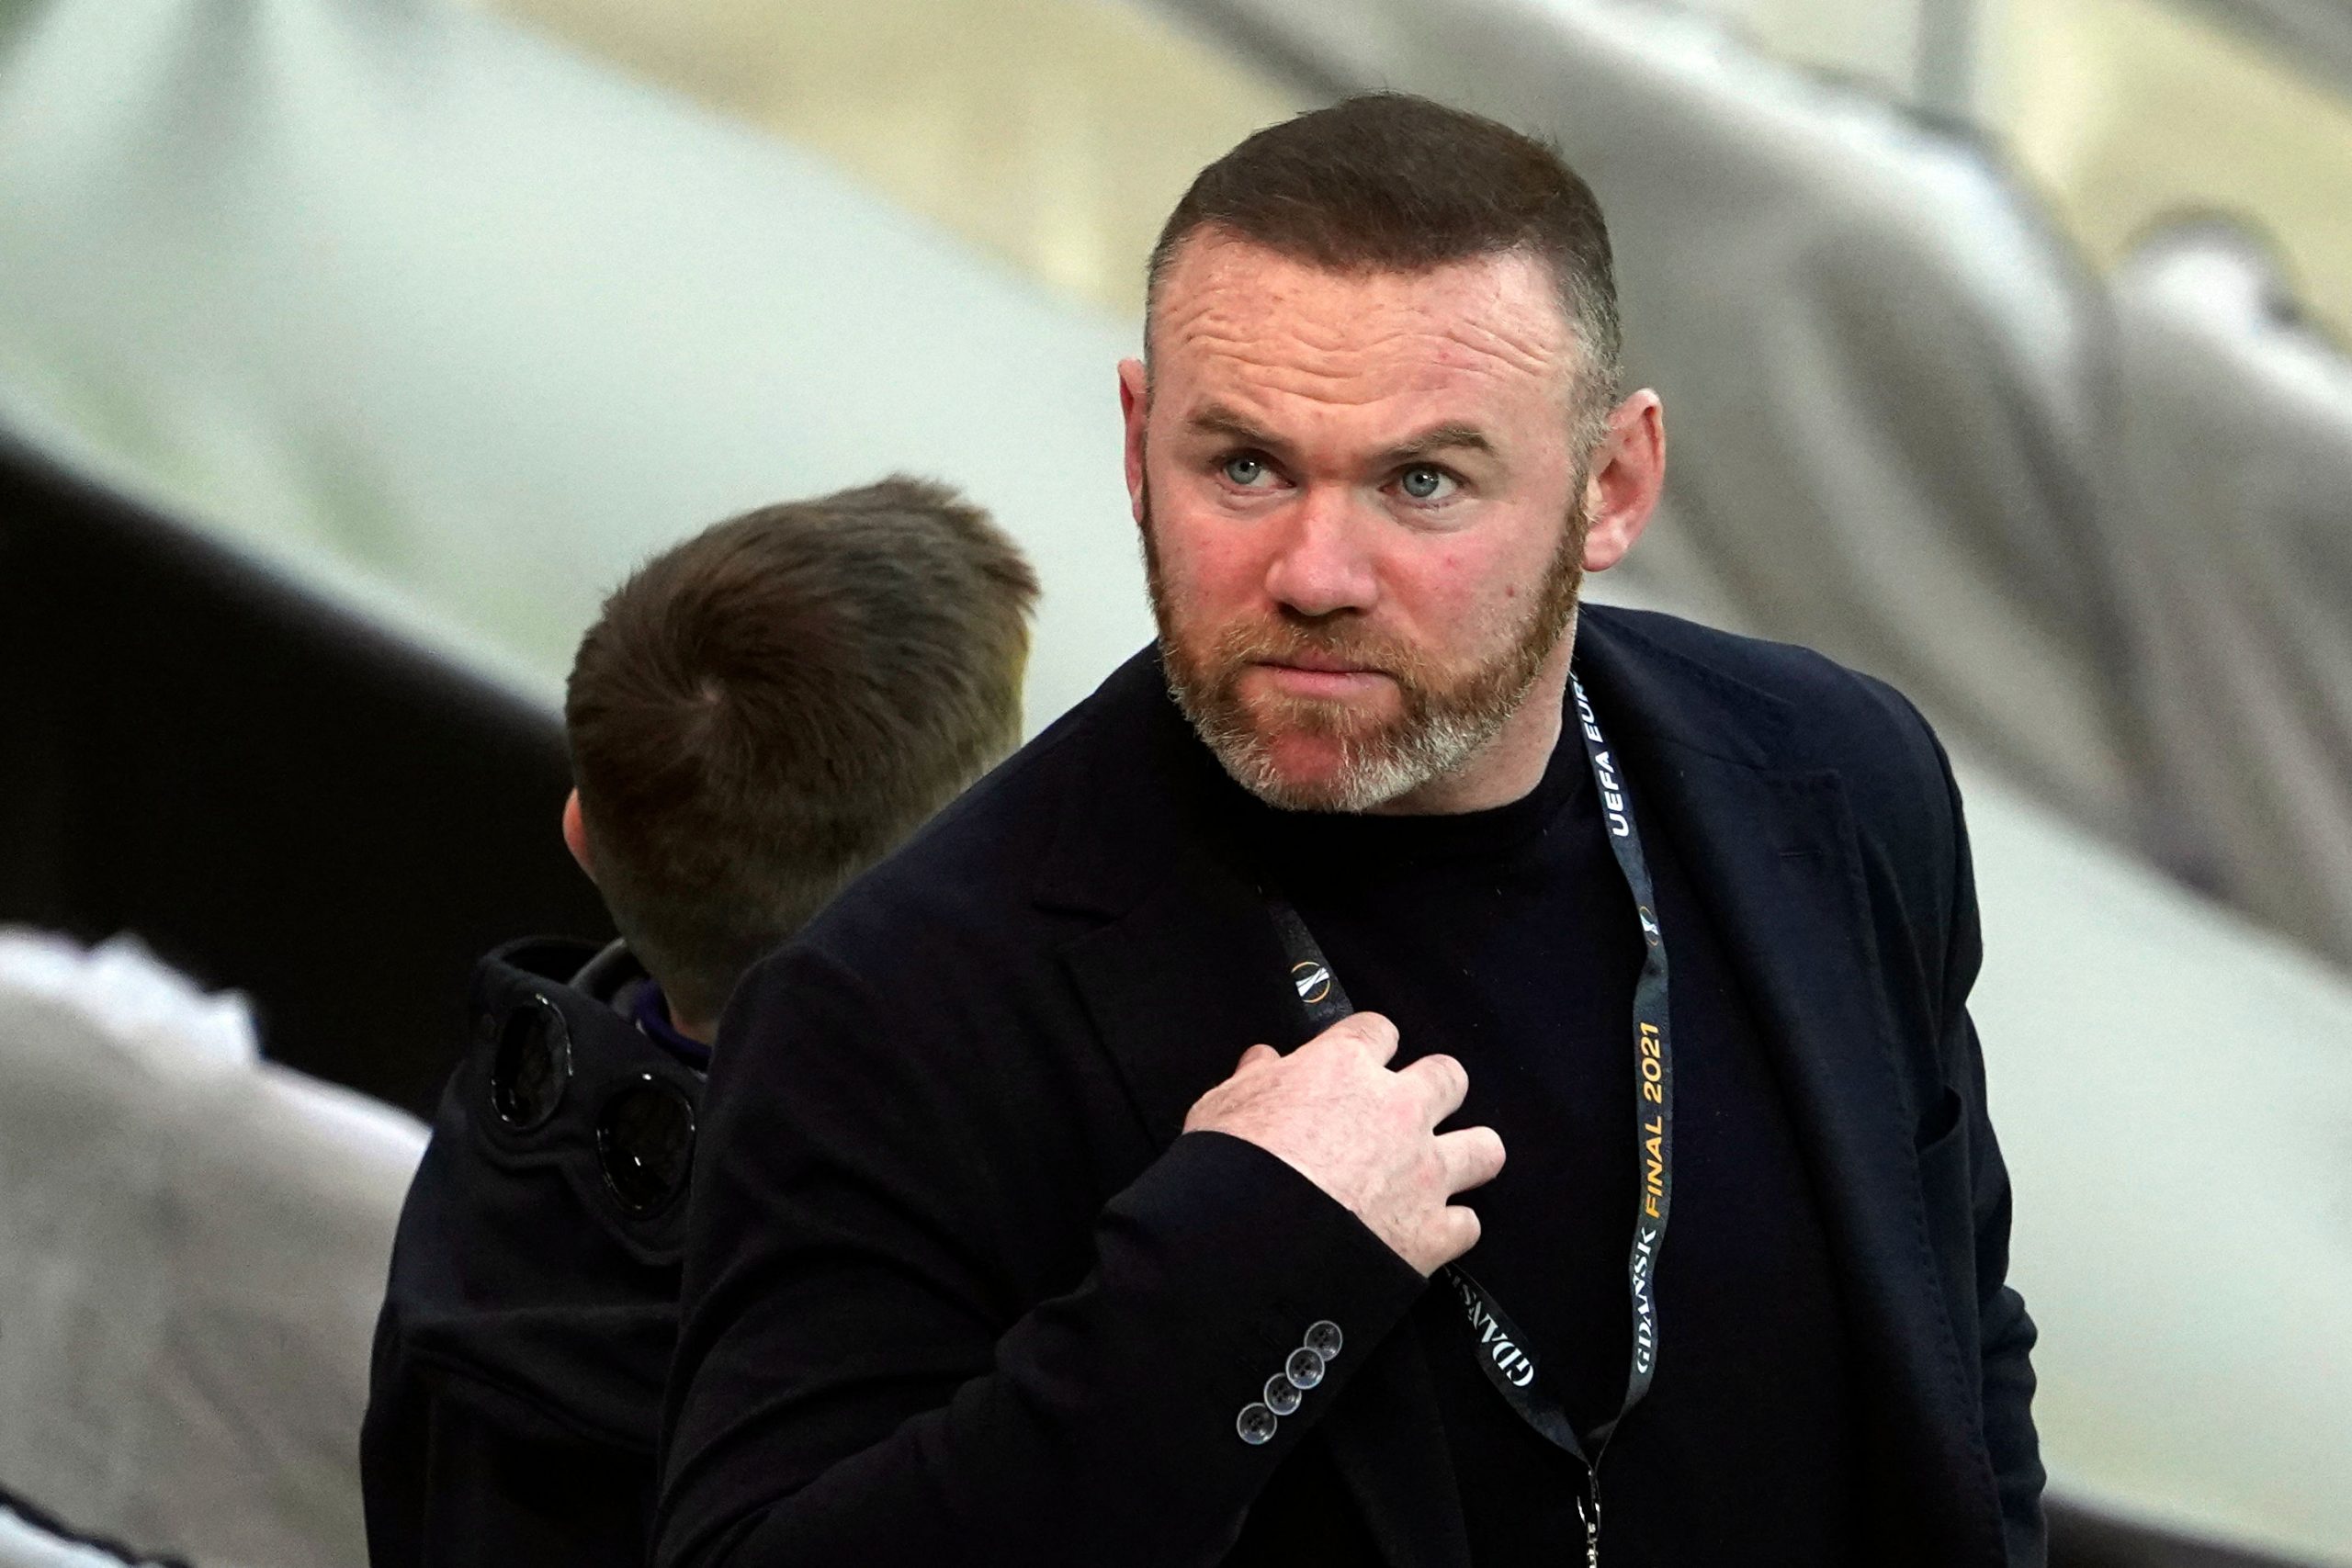 Wayne Rooney to coach DC United in Major League Soccer: Report